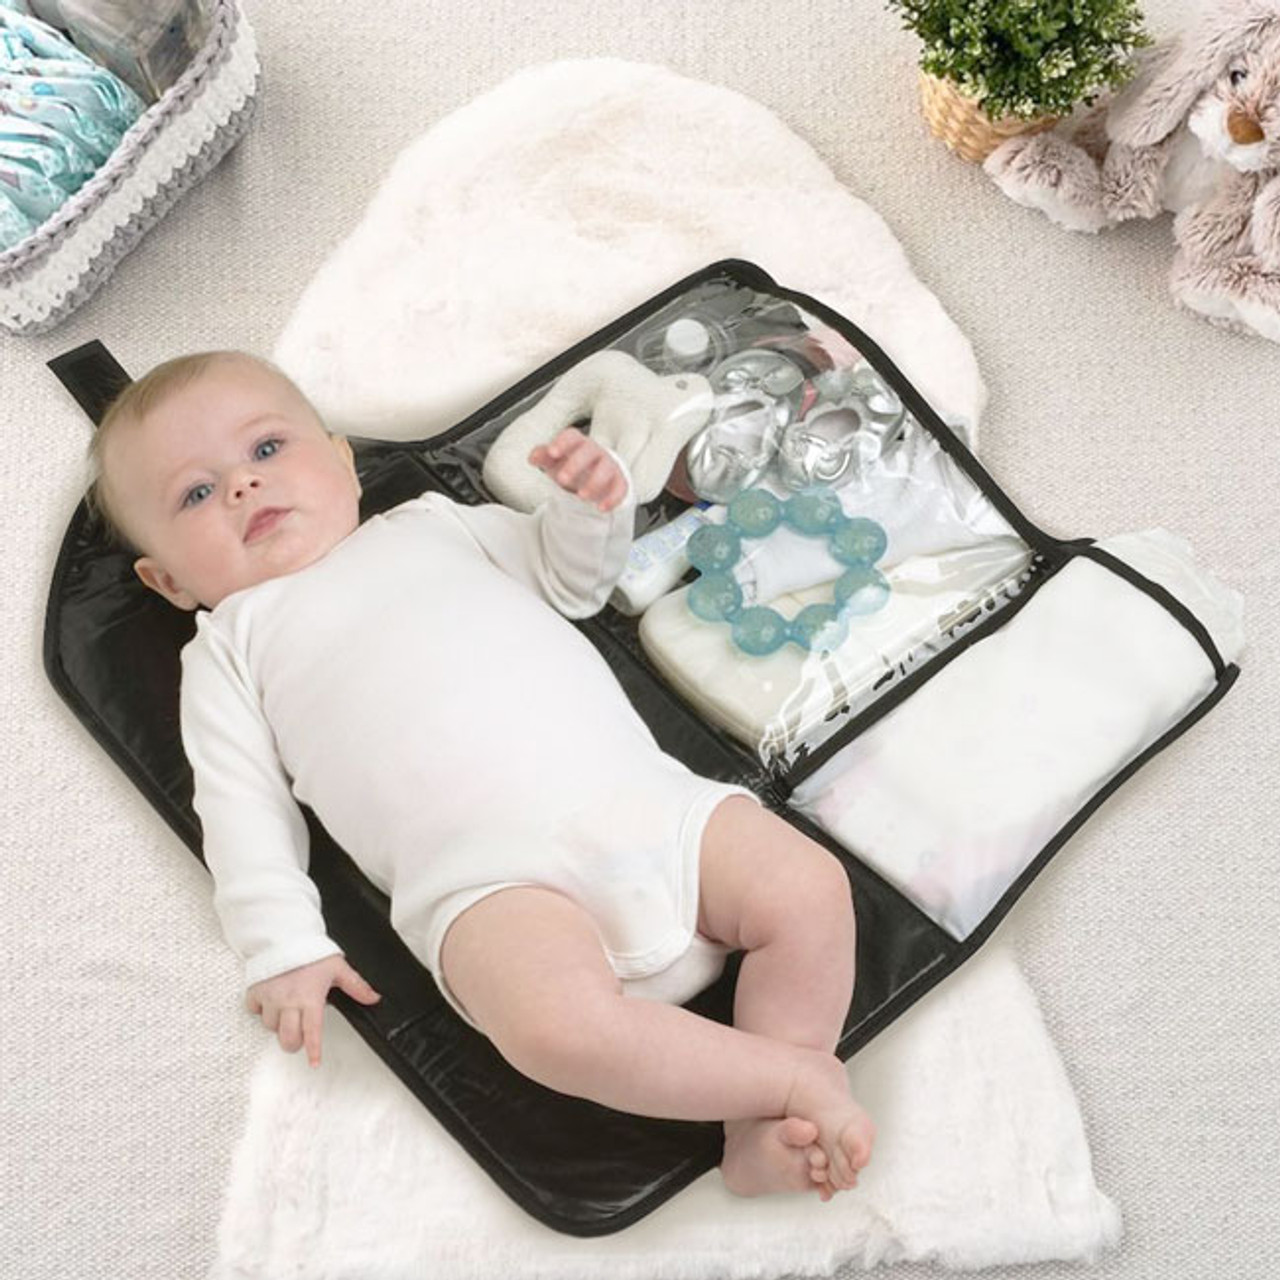 Baby Gifts NZ | New Baby Gift Ideas - Not Socks Gifts NZ